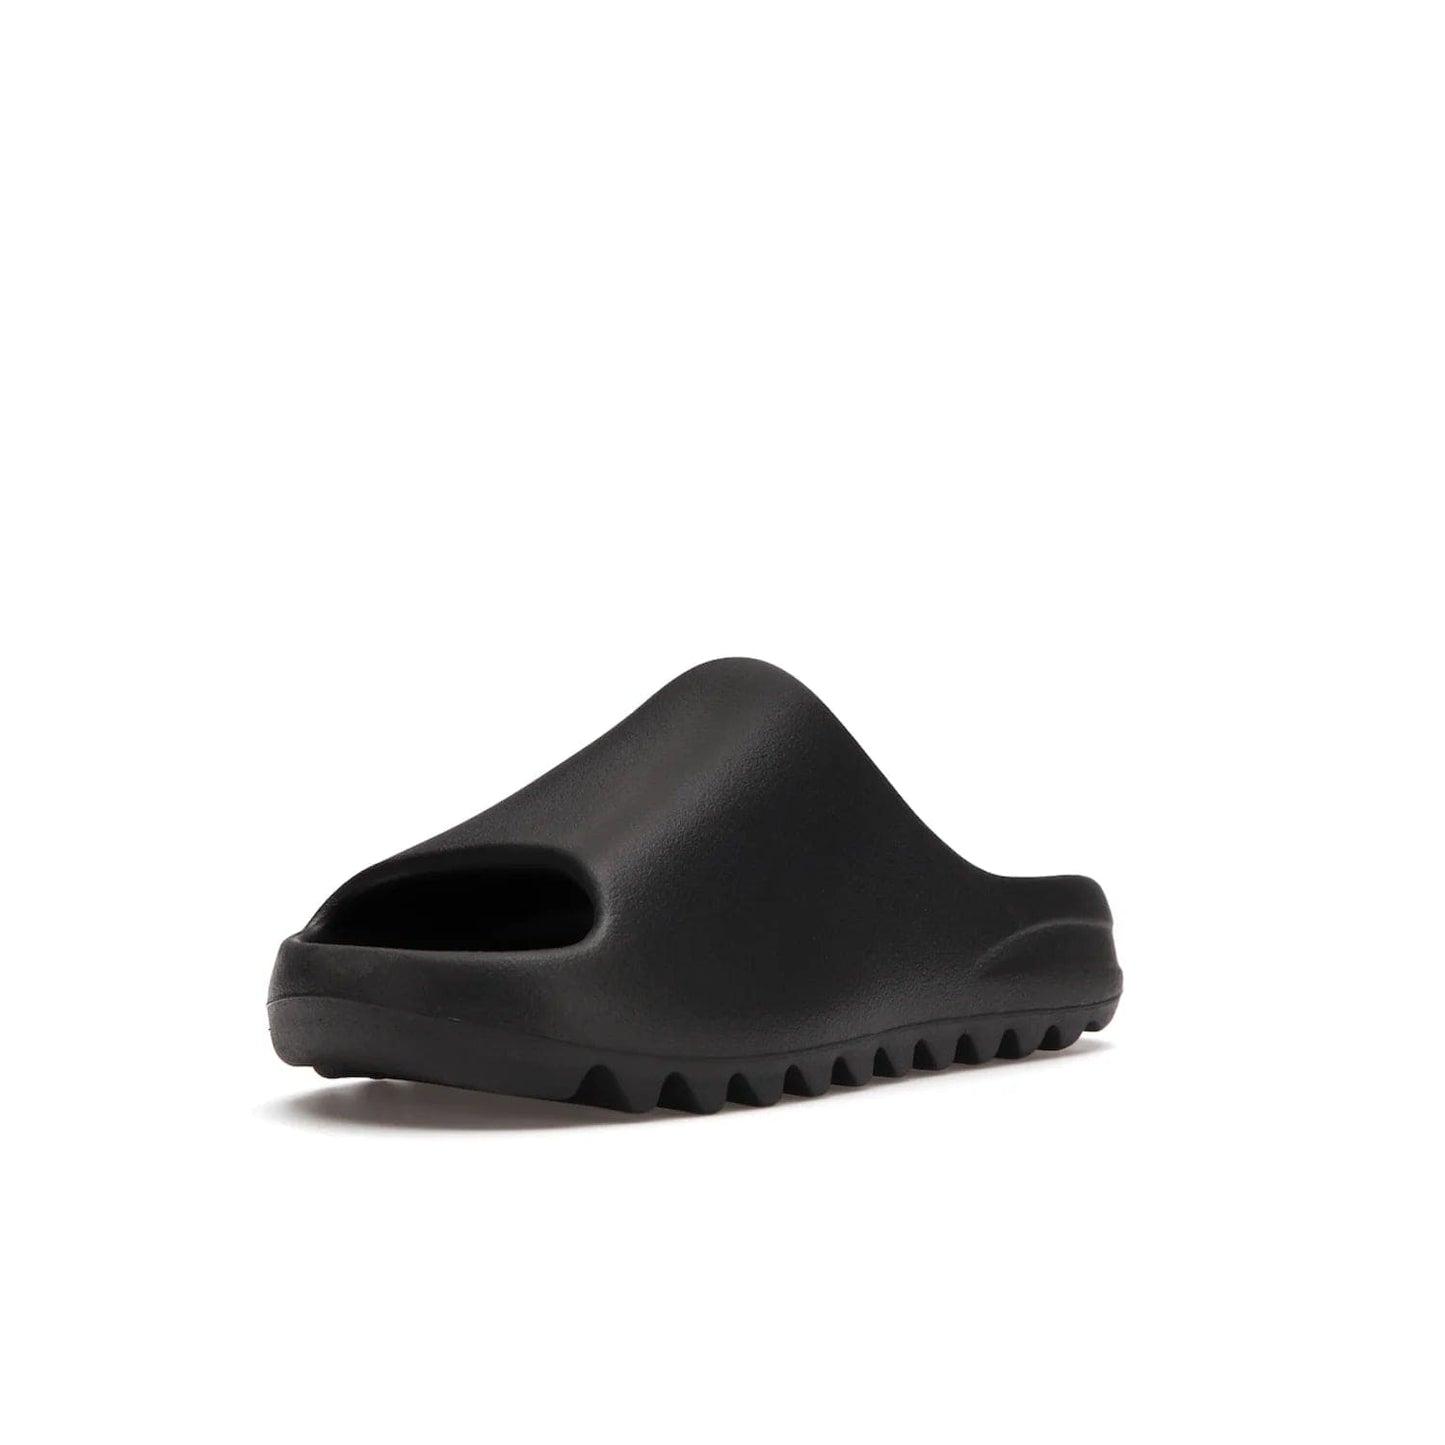 adidas Yeezy Slide Onyx - Image 14 - Only at www.BallersClubKickz.com - Step into comfort and style with the adidas Yeezy Slide Onyx. Featuring foam construction, an all-black colorway and a grooved outsole for stability and responsiveness, this versatile slide is a must-have for your collection.